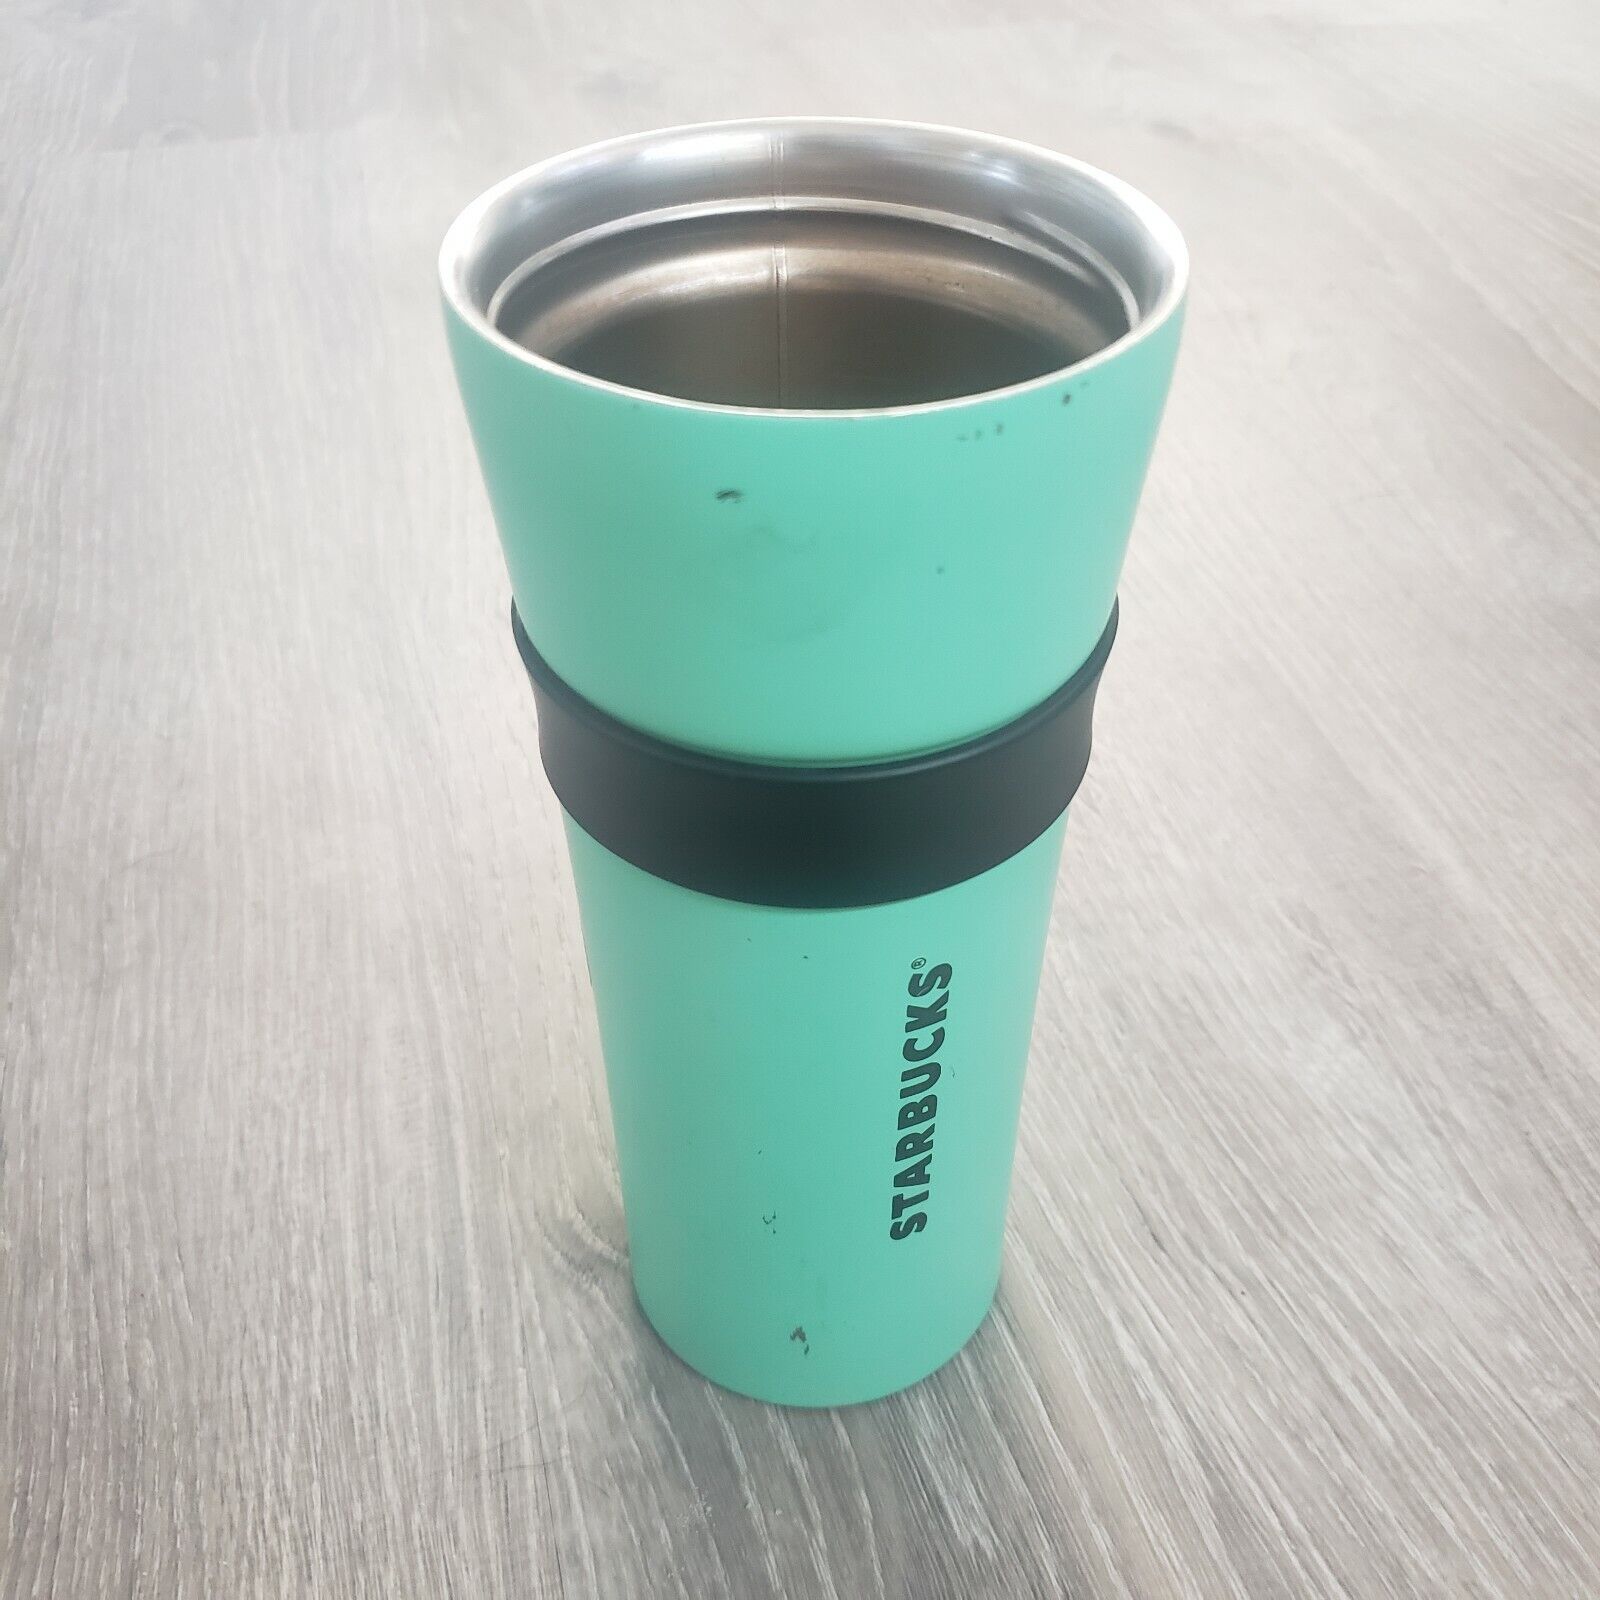 Starbucks 2016 Tall Stainless Steel Tumbler Green And Black 16 oz To Go No Lid